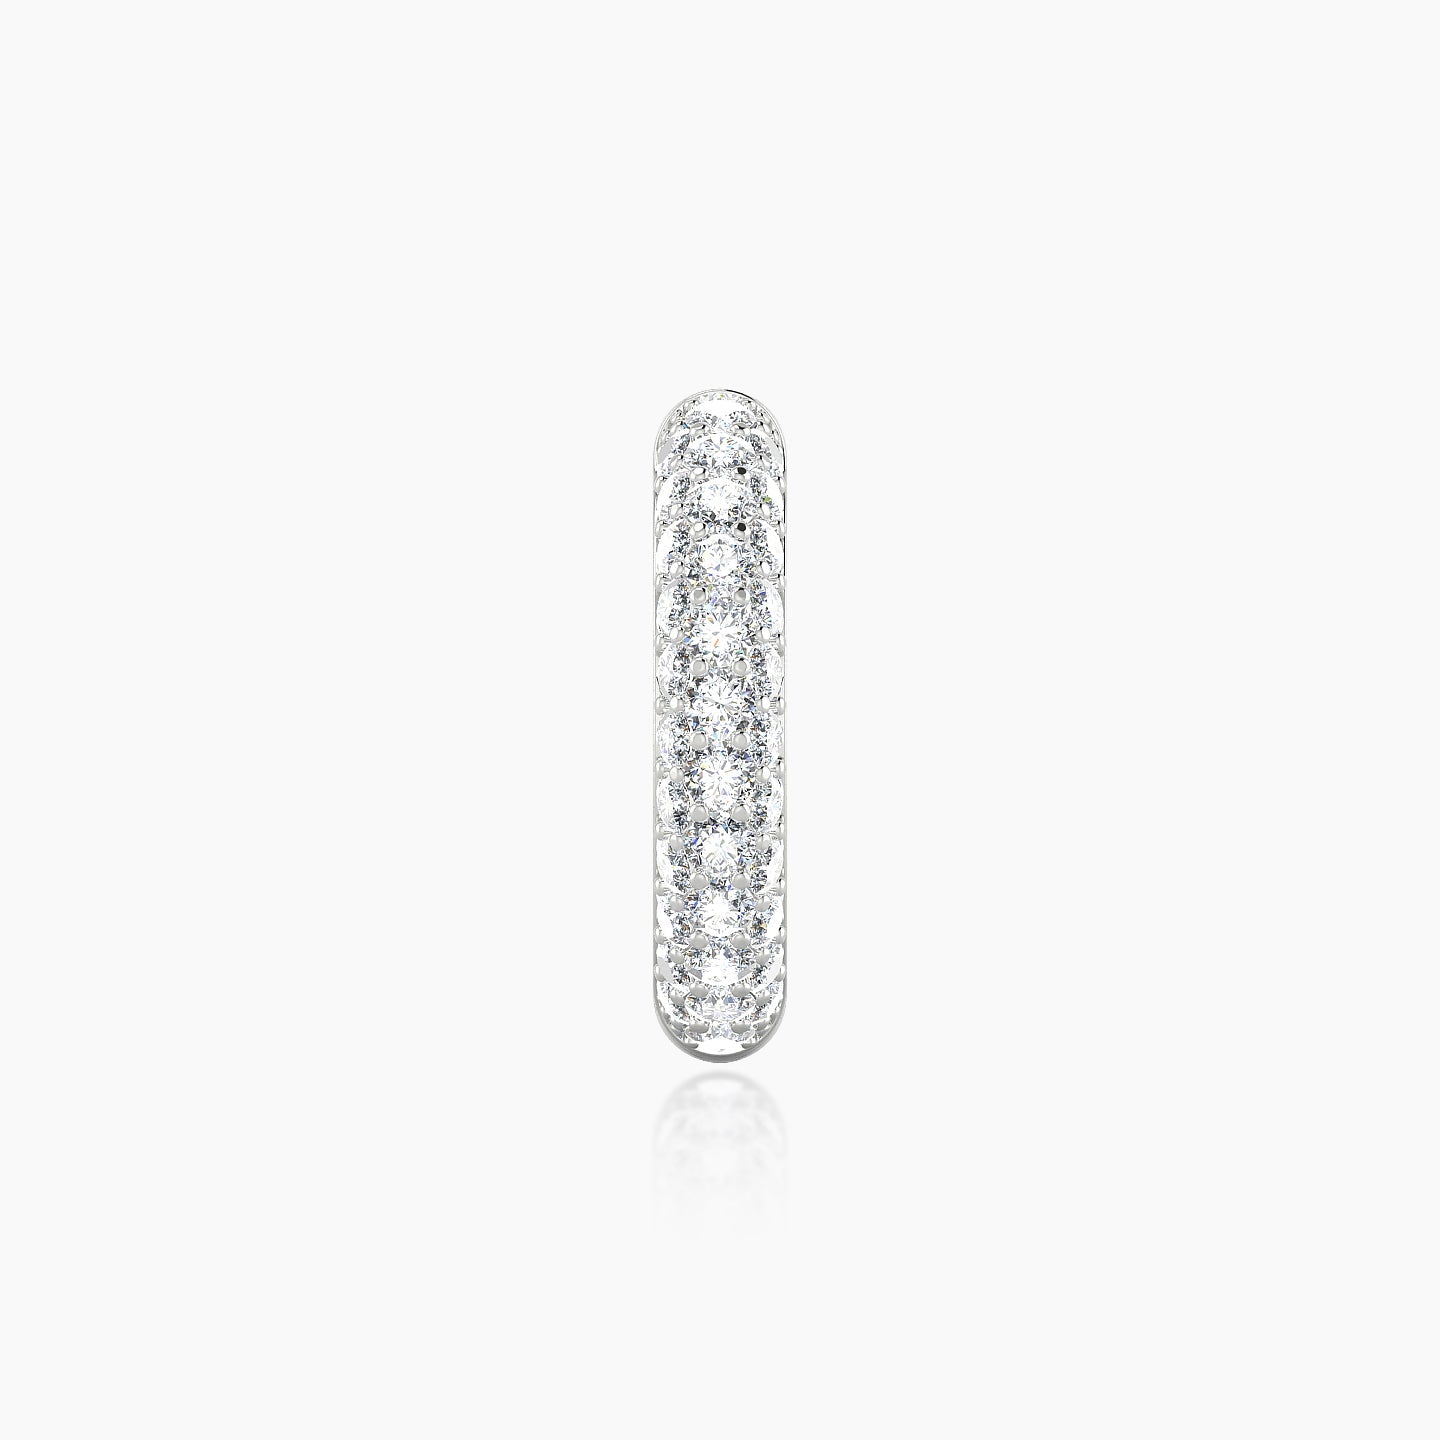 Theia | 18k White Gold 9.5 mm Pave Diamond Nose Ring Piercing